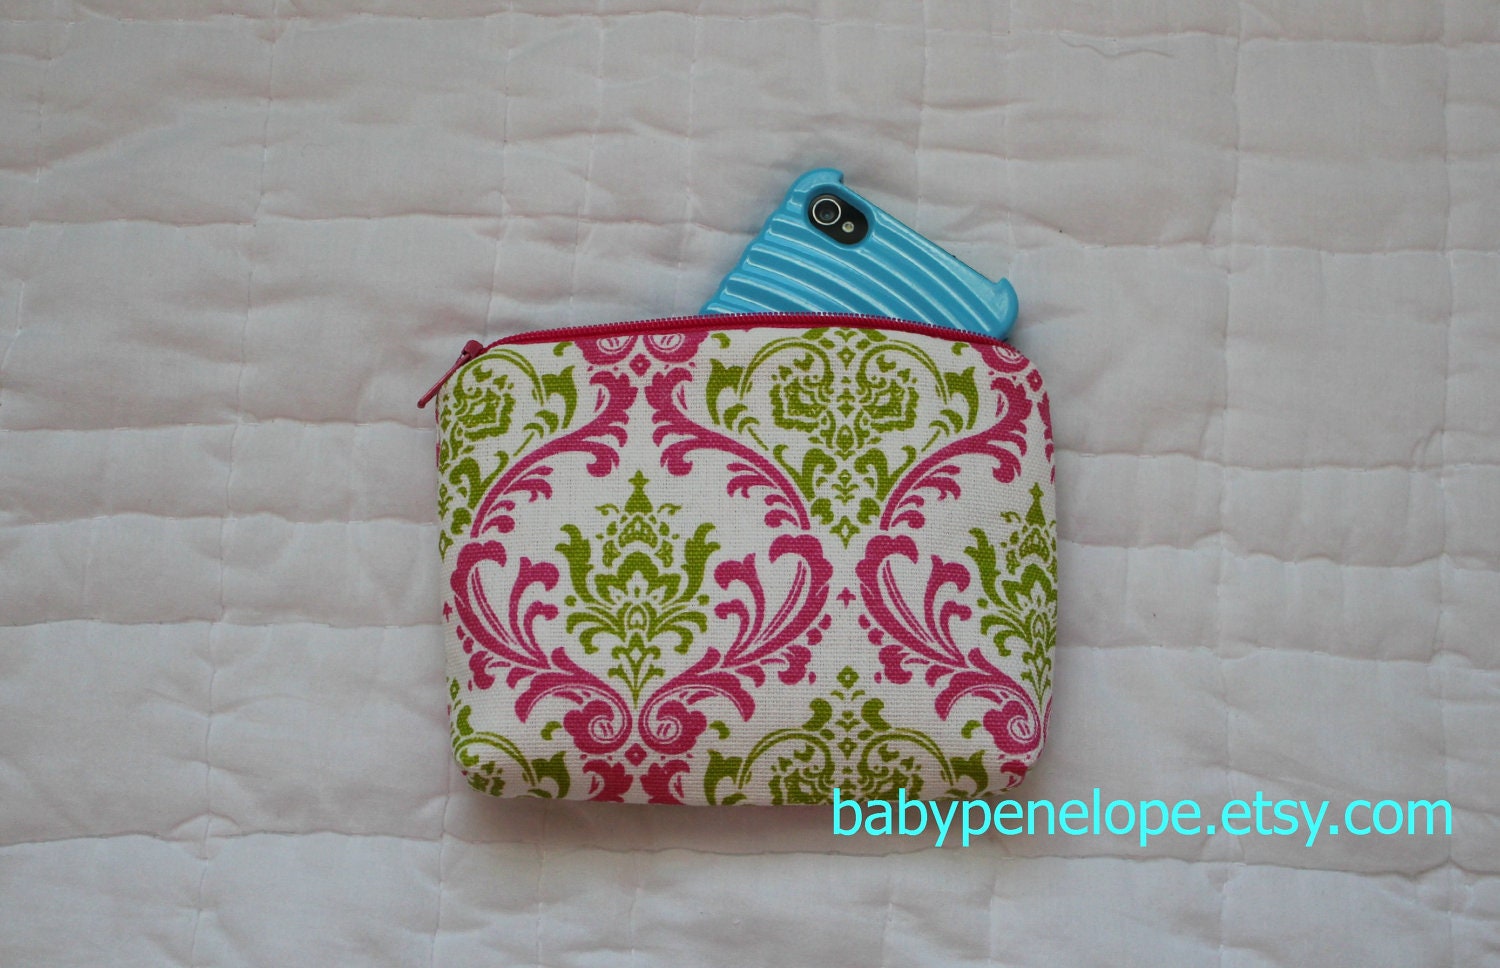 Paded Cosmetic Bag/ Gadget Case - Pink and Green Damask - Ready to Ship